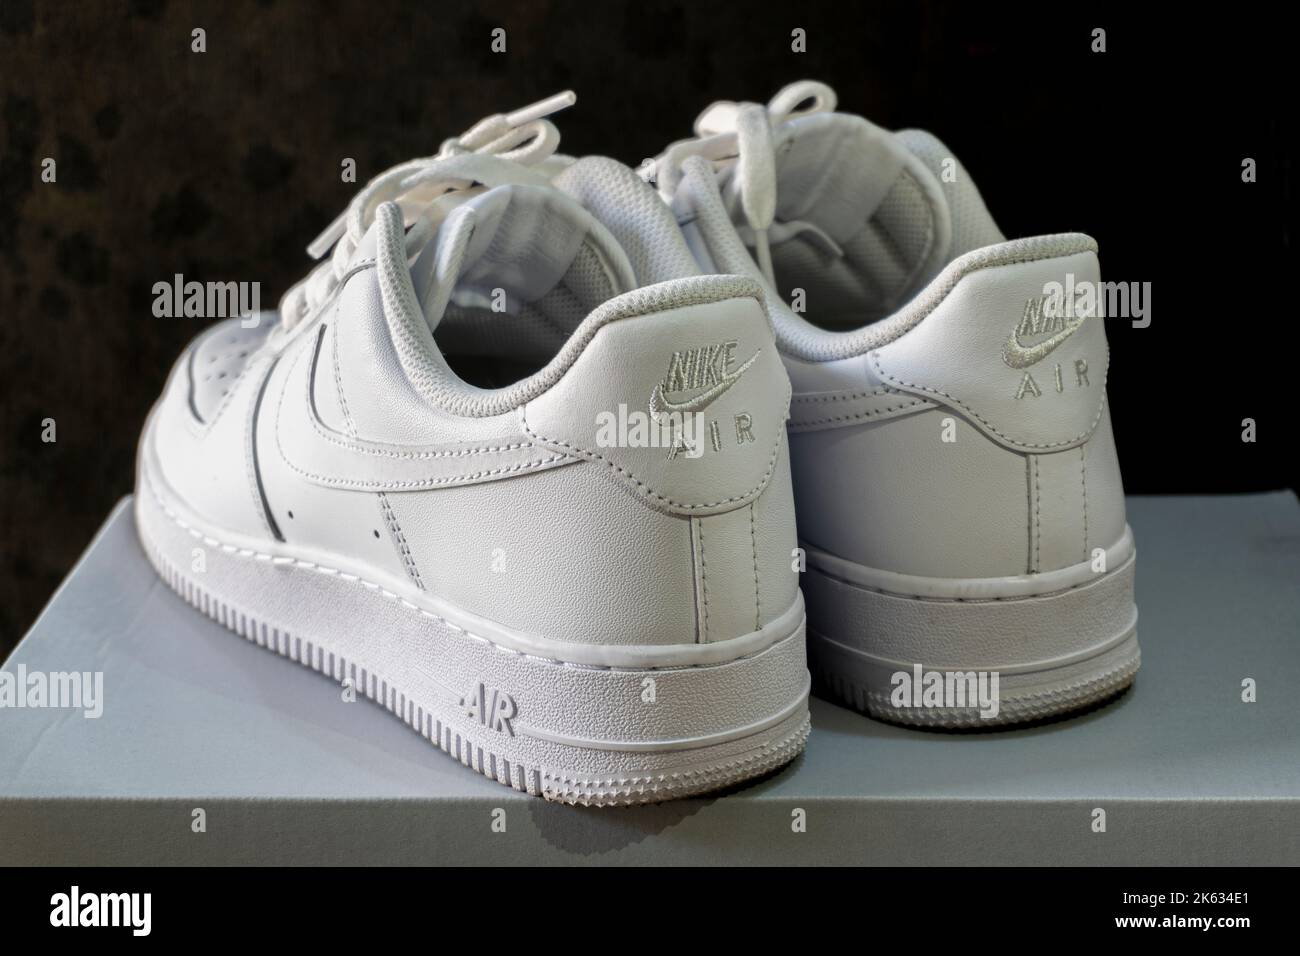 Nike Air Force 1 white sneakers isolated on dark background. Illustrative editorial photo. Stock Photo